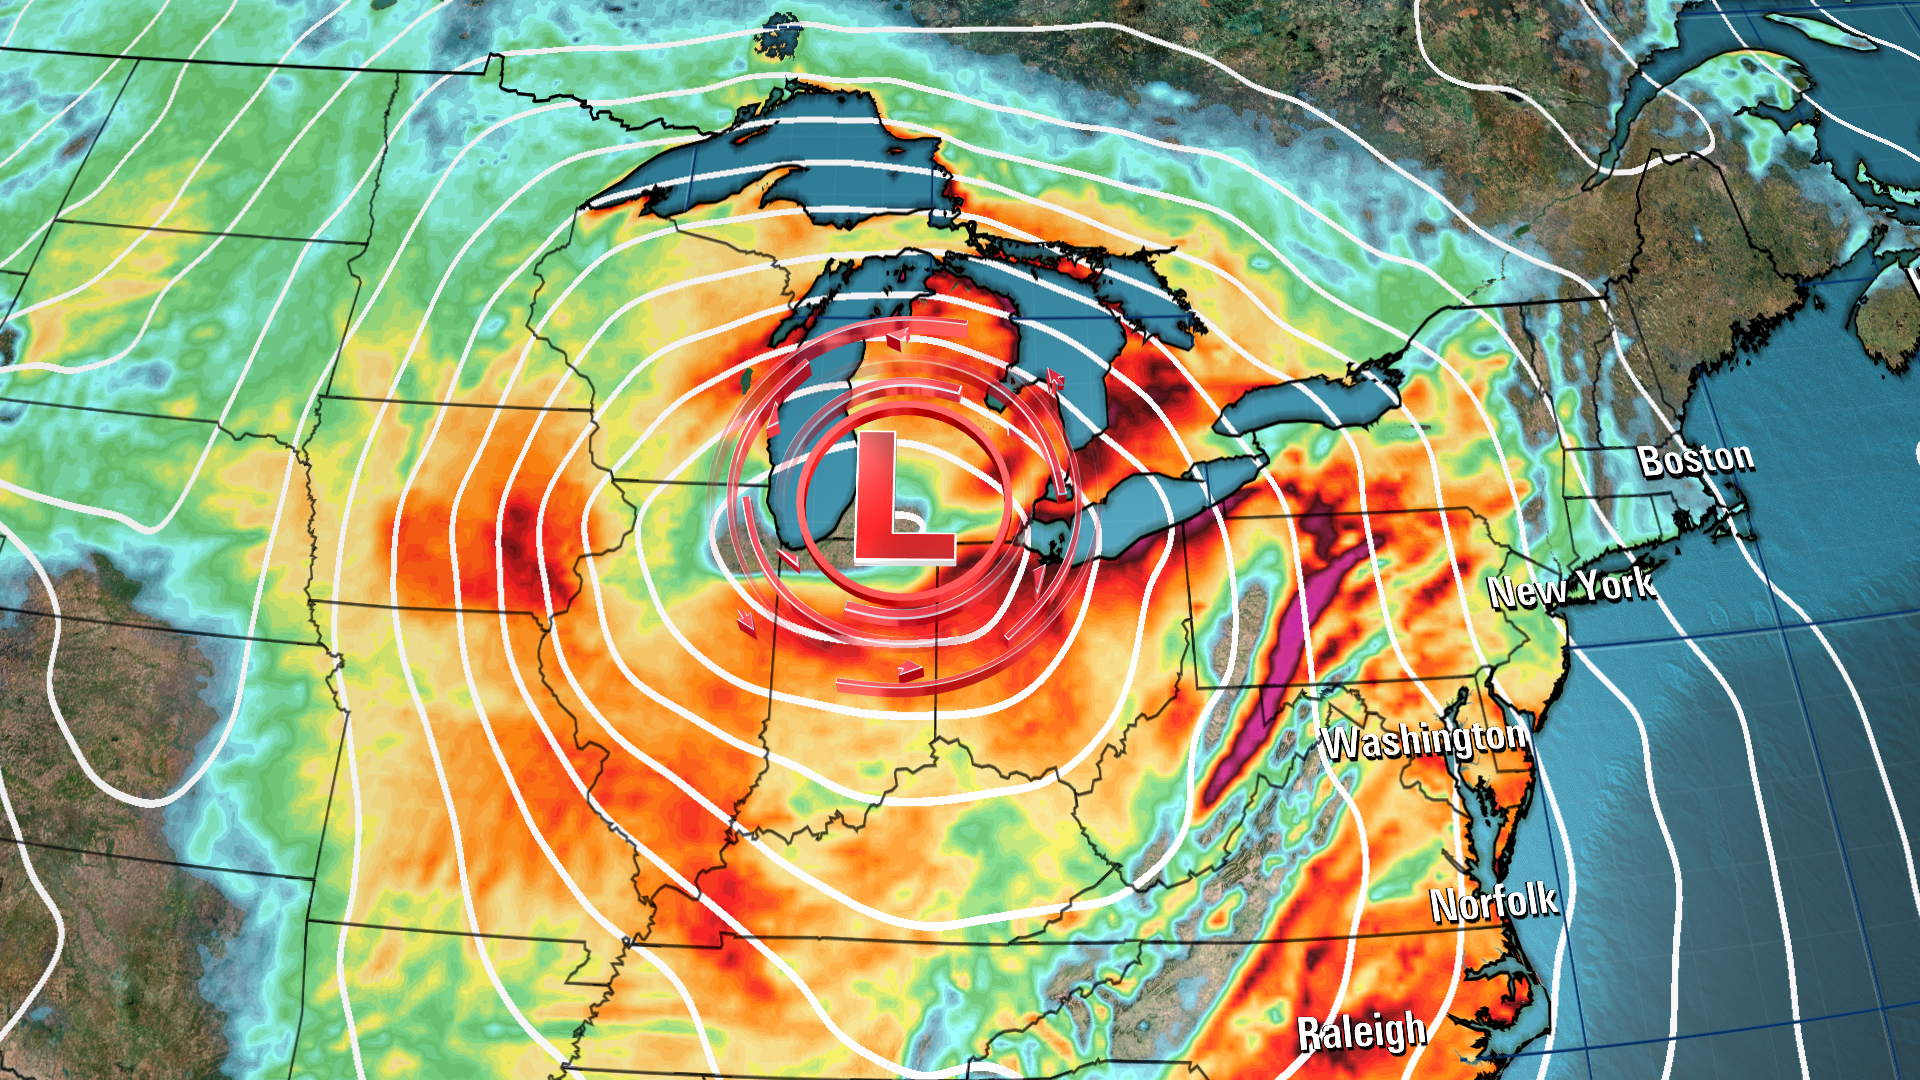 A forecast model shows a powerful storm at its full strength Friday night, producing robust wind gusts while centered over the Great Lakes.